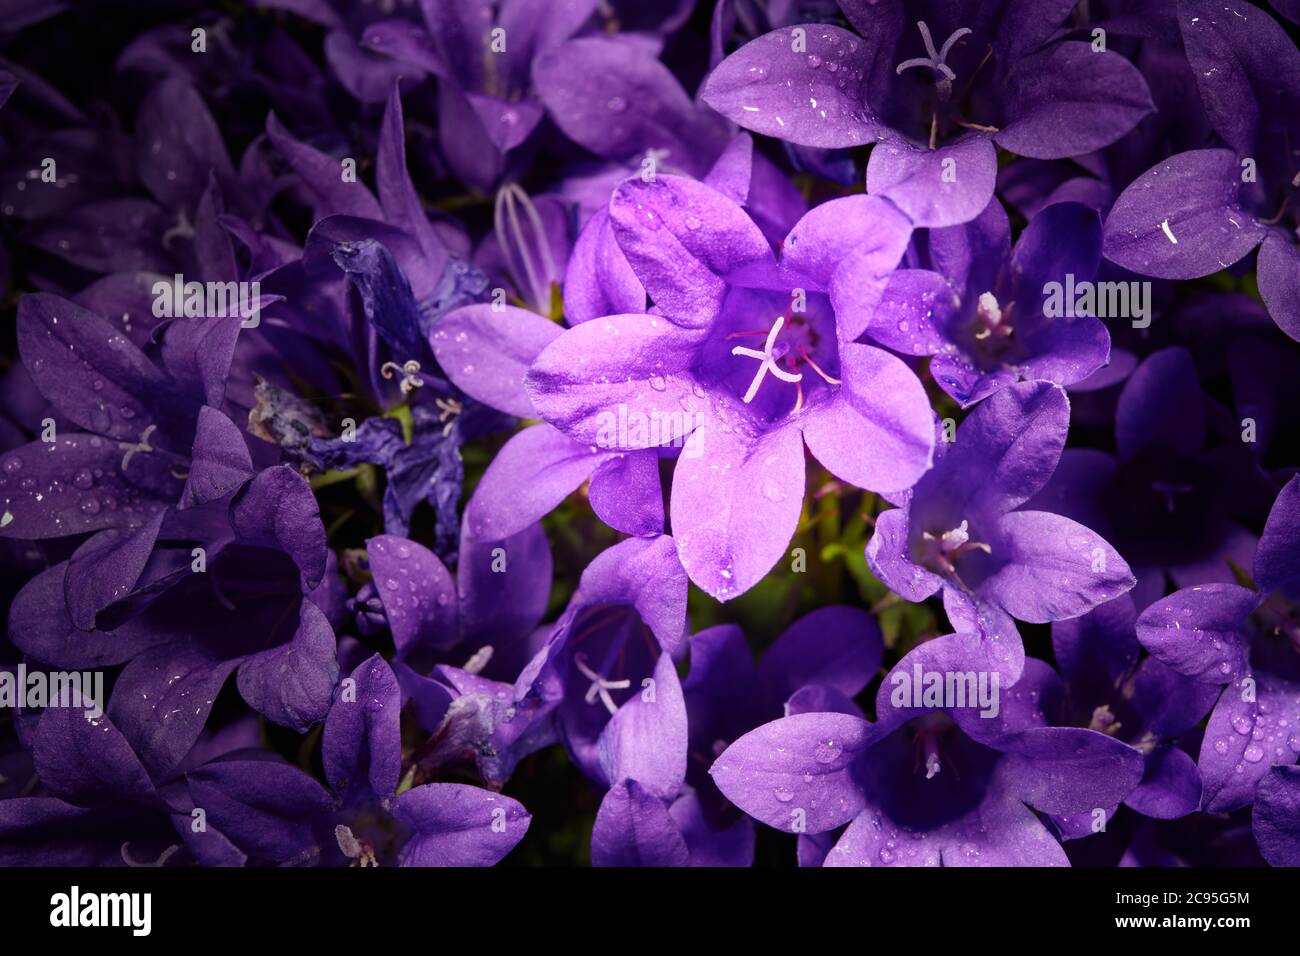 The small mauve and purple flower of the Dalmation bellflower or Serbian bellflower (campanula portenschlagiana) plant. Stock Photo